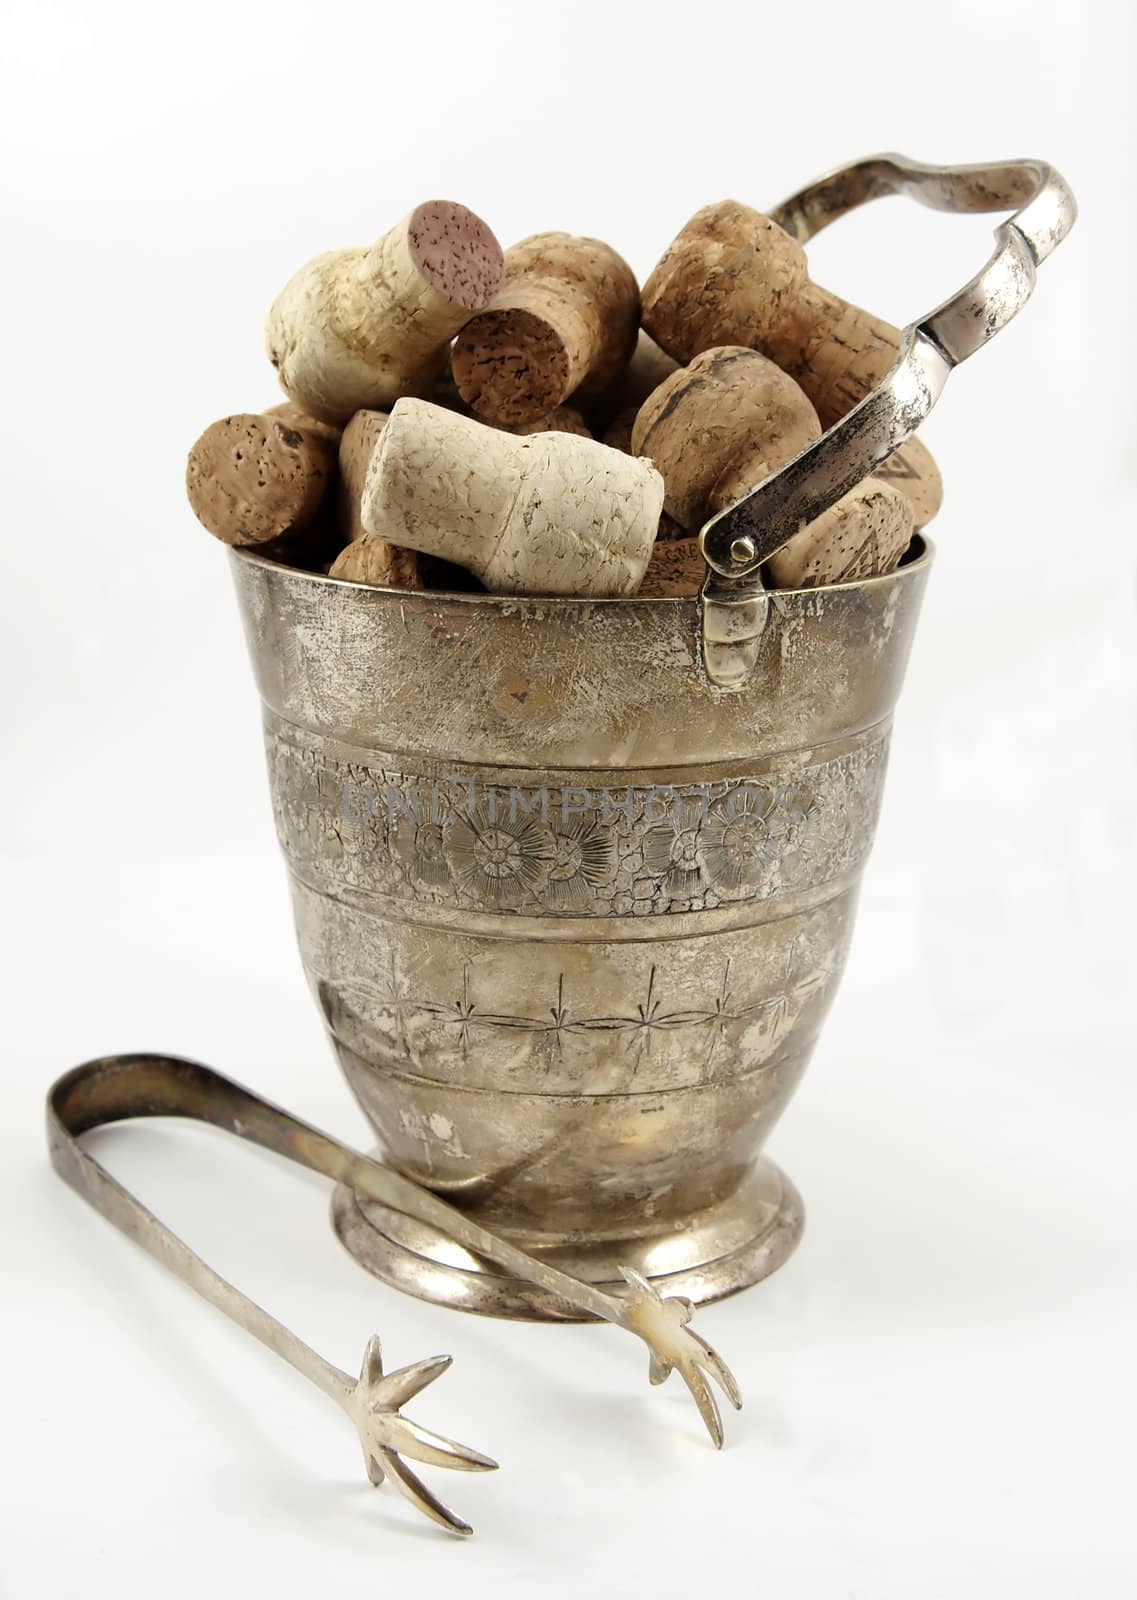 Ice tongs in front of bucket with corks by serpl